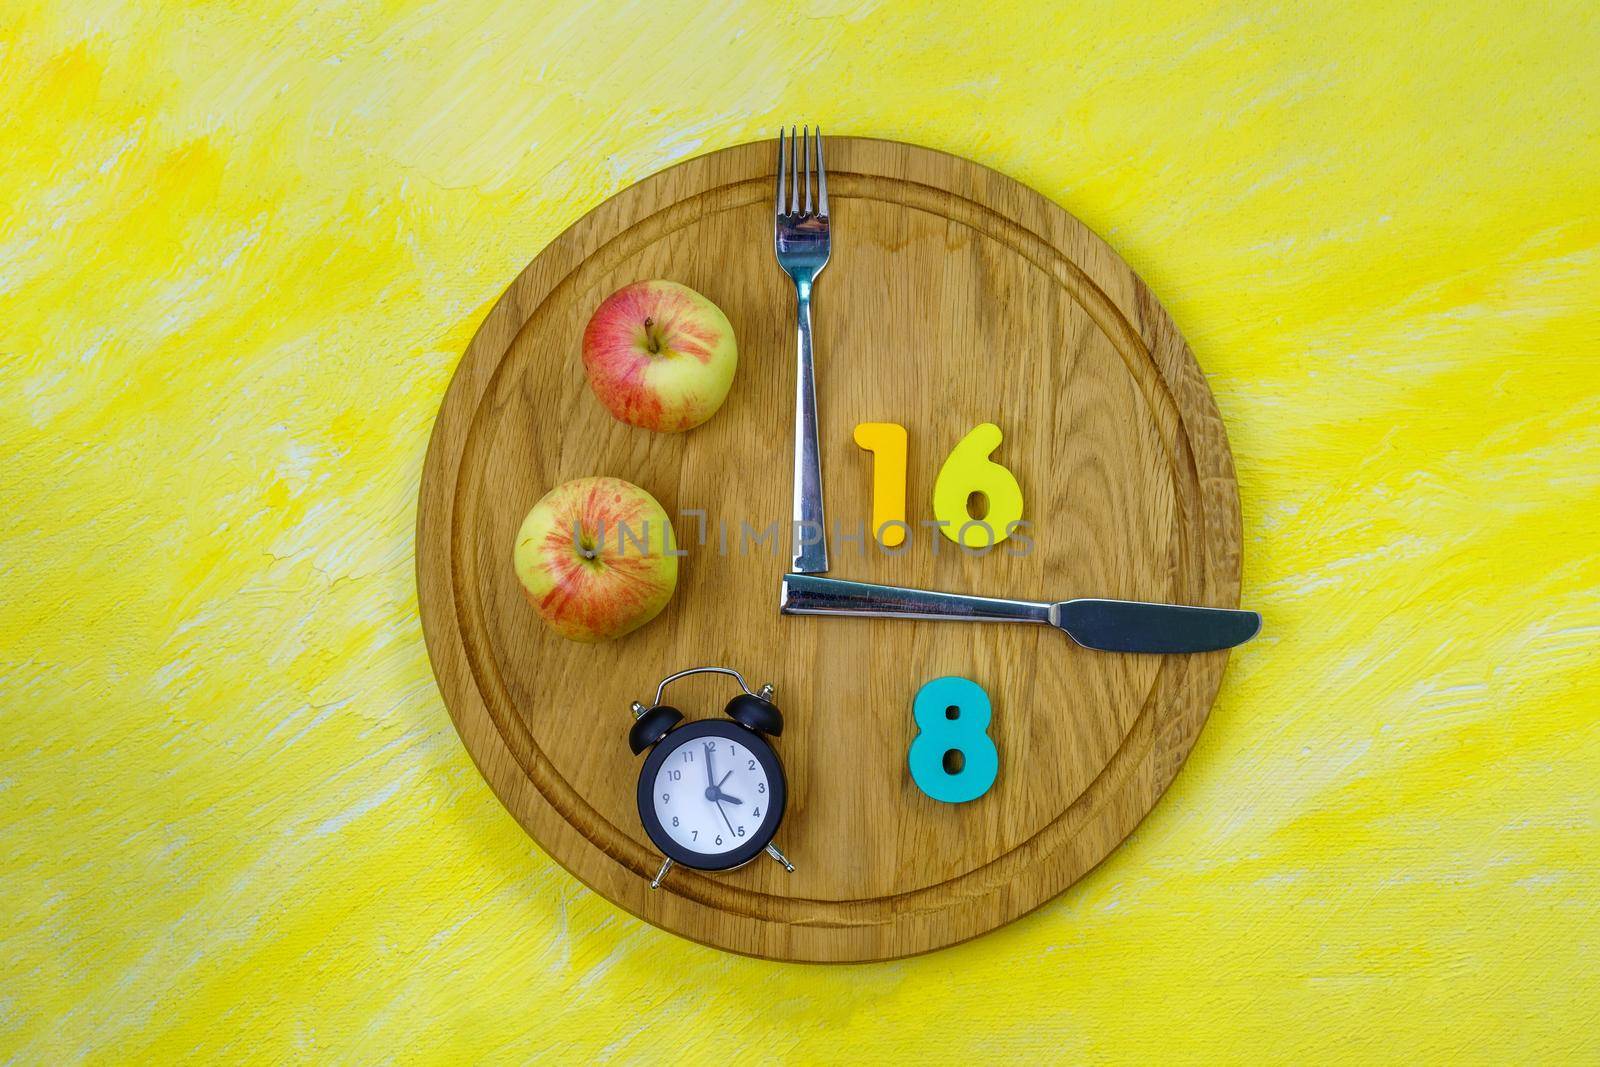 Intermittent Fasting 16:8. Popular health and fitness trend. Flat lay. Healthy eating, weight loss by darksoul72